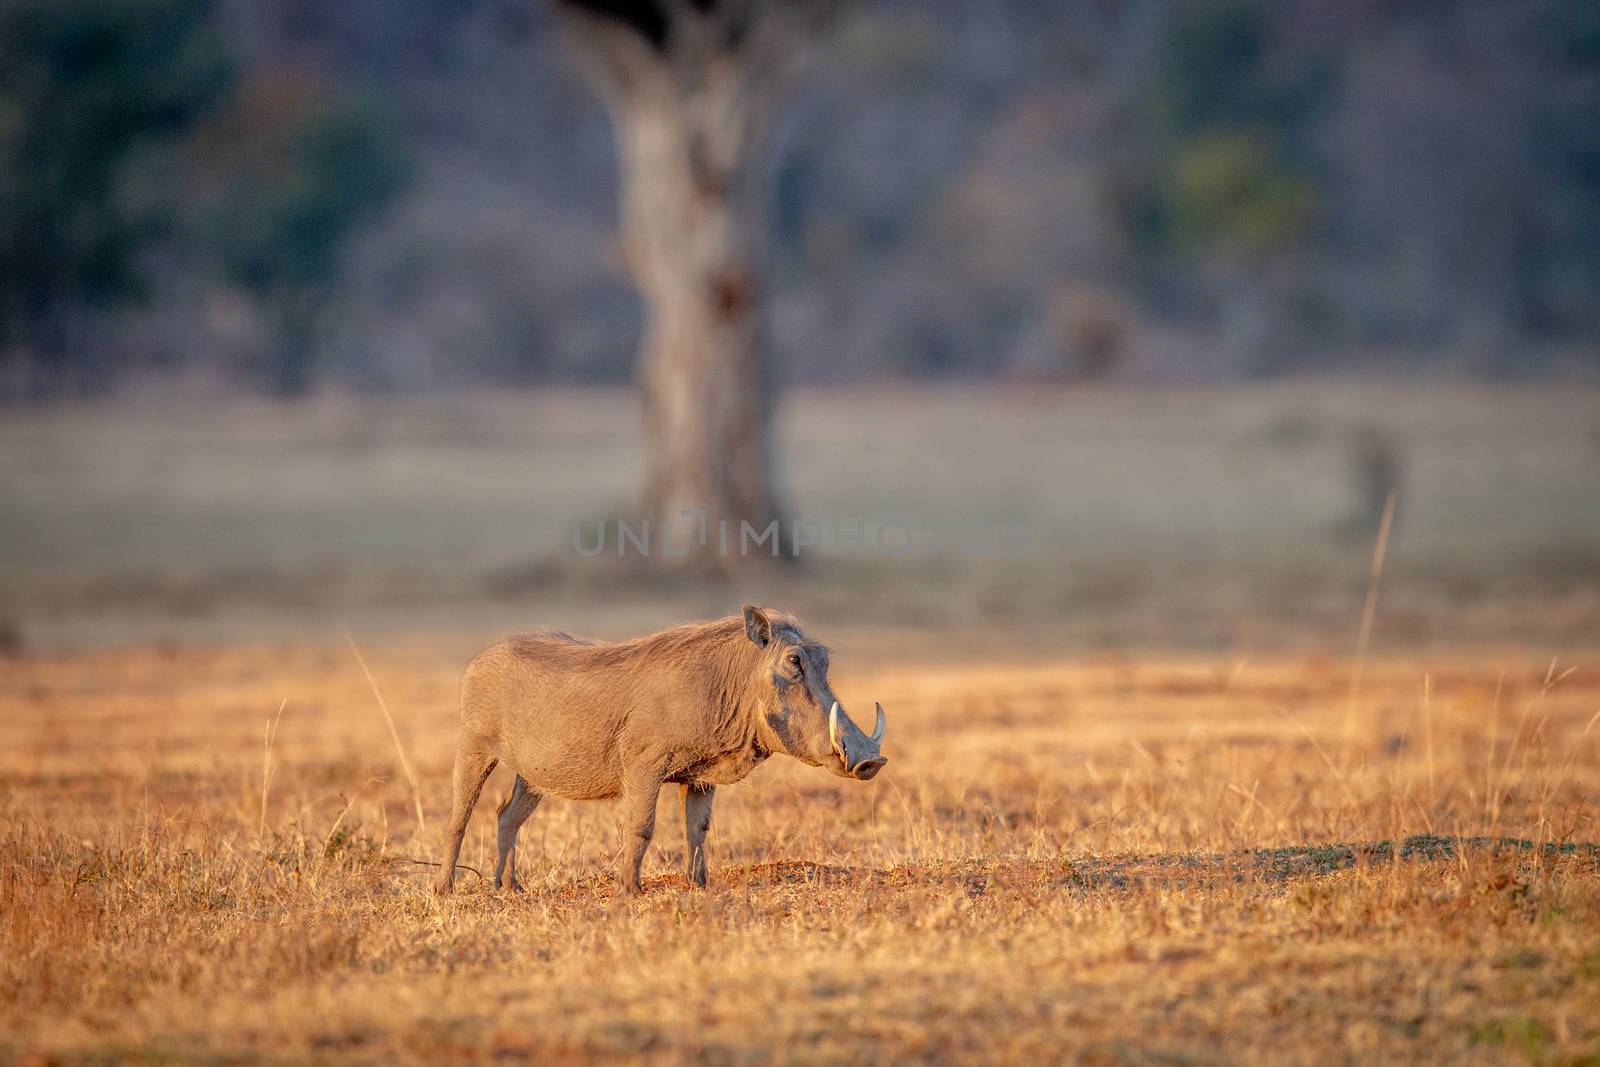 Warthog standing in the grass in the Welgevonden game reserve, South Africa.